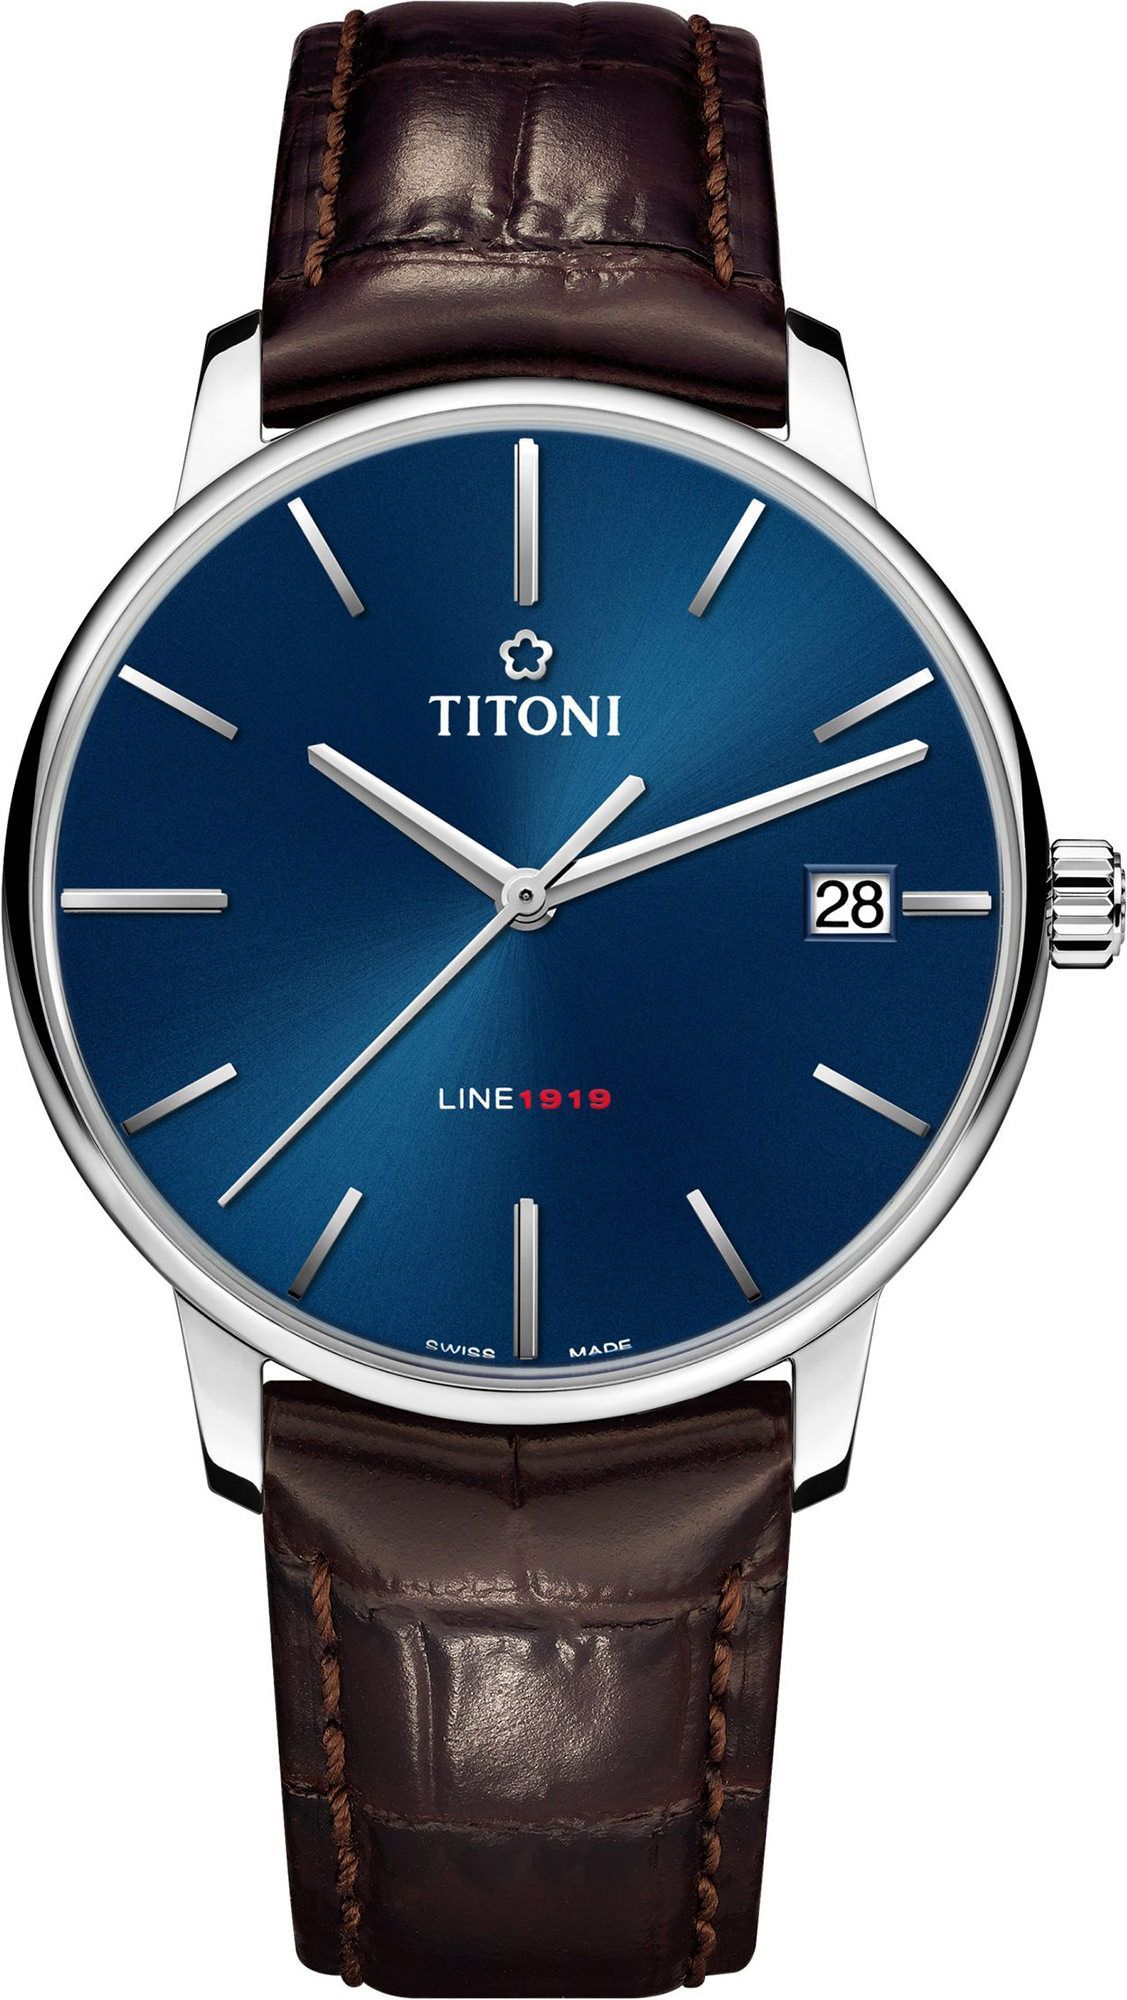 Titoni Line 1919  Blue Dial 40 mm Automatic Watch For Men - 1